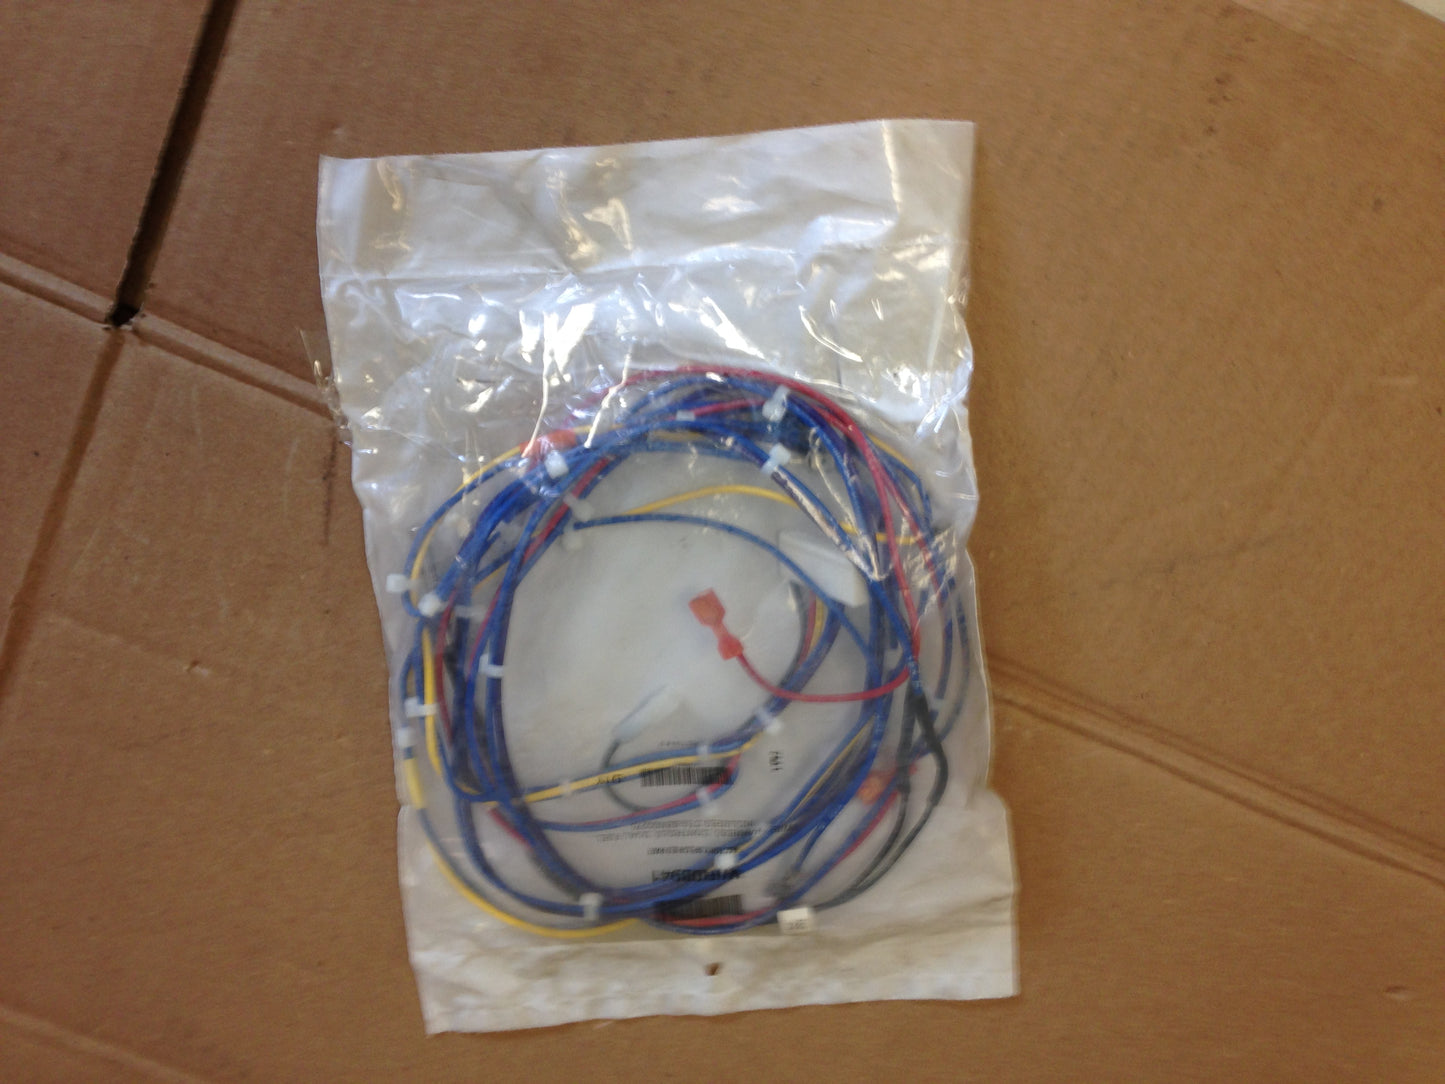 WIRE HARNESS CONTROLS DUAL FUEL